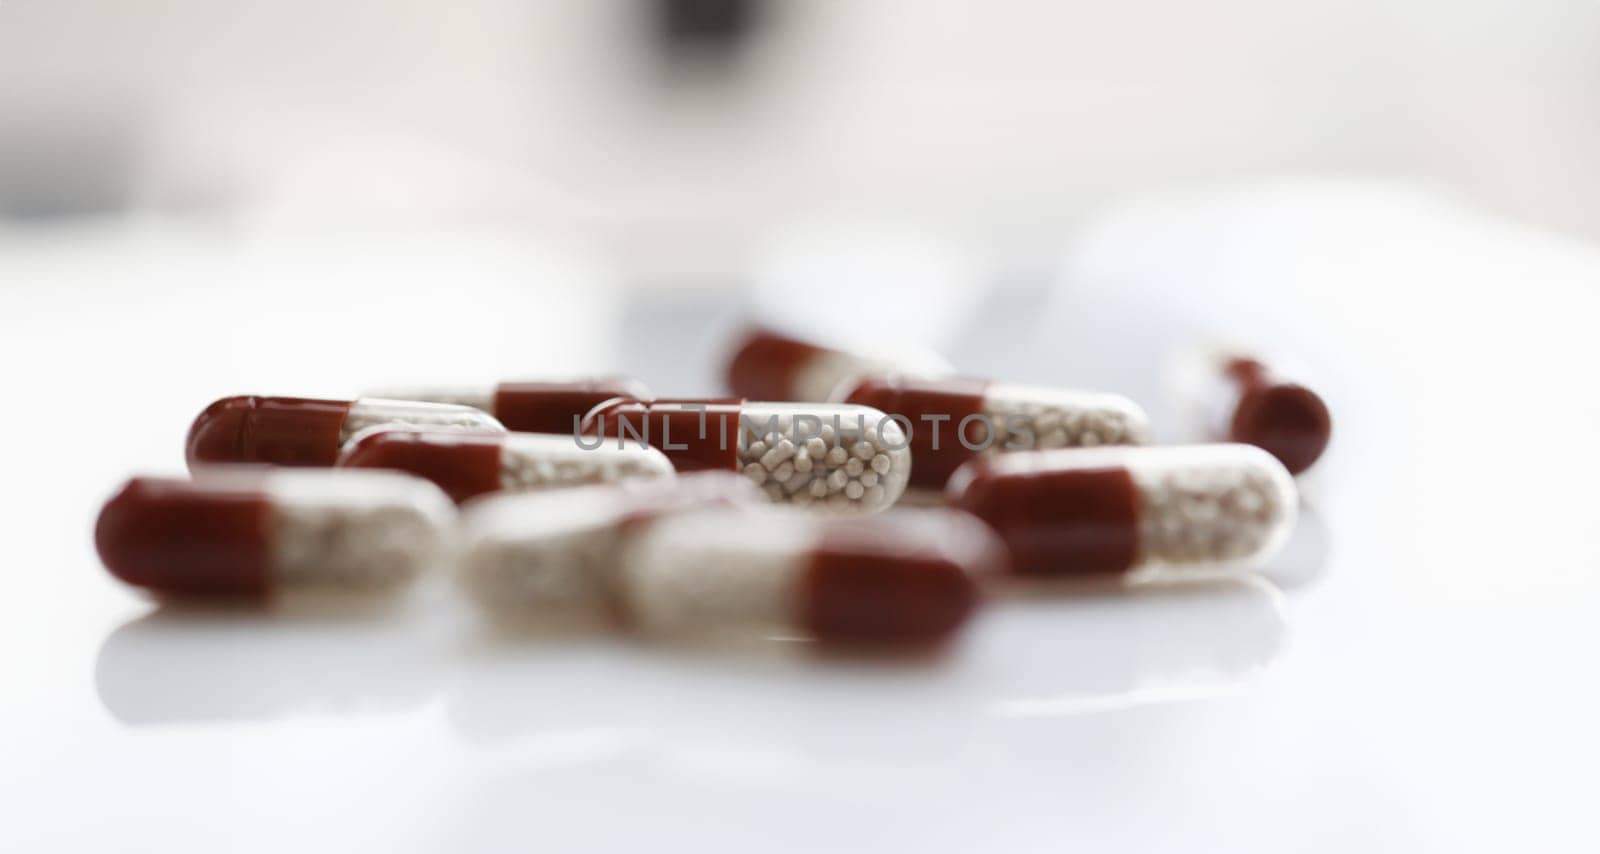 Tablets scattered on the table of the pharmaceutical laboratory pill for the prescription and treatment of various diseases chemistry